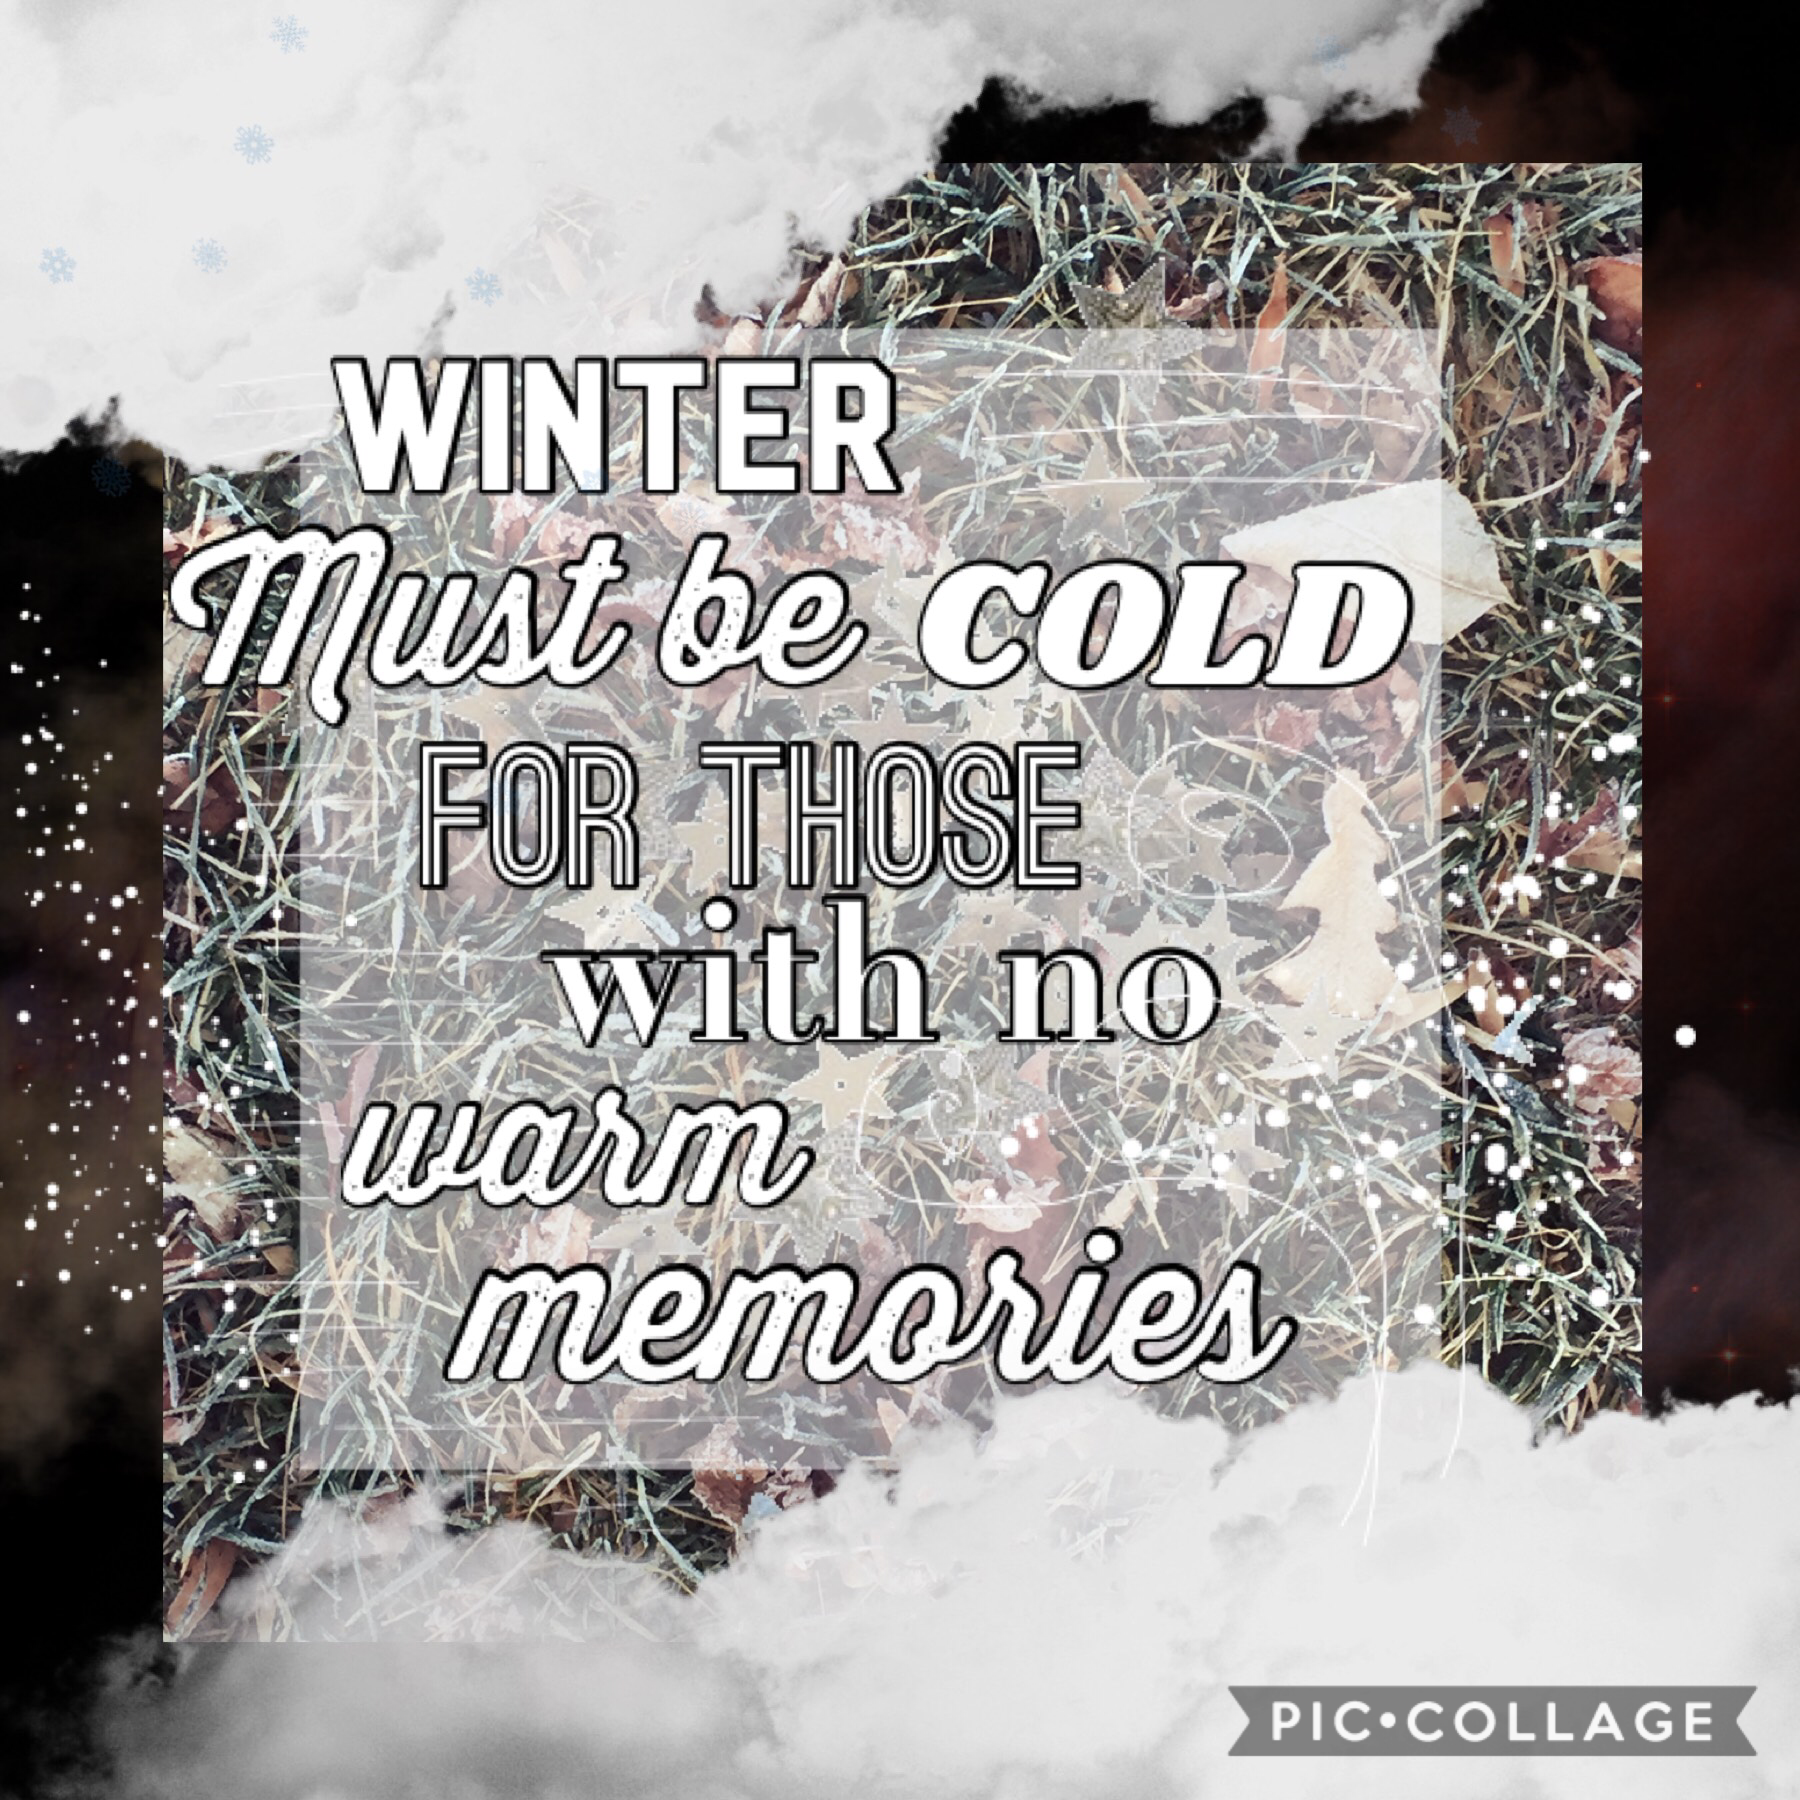 ❄️Winter must be cold for those with no warm memories❄️
I think this turned out pretty well!